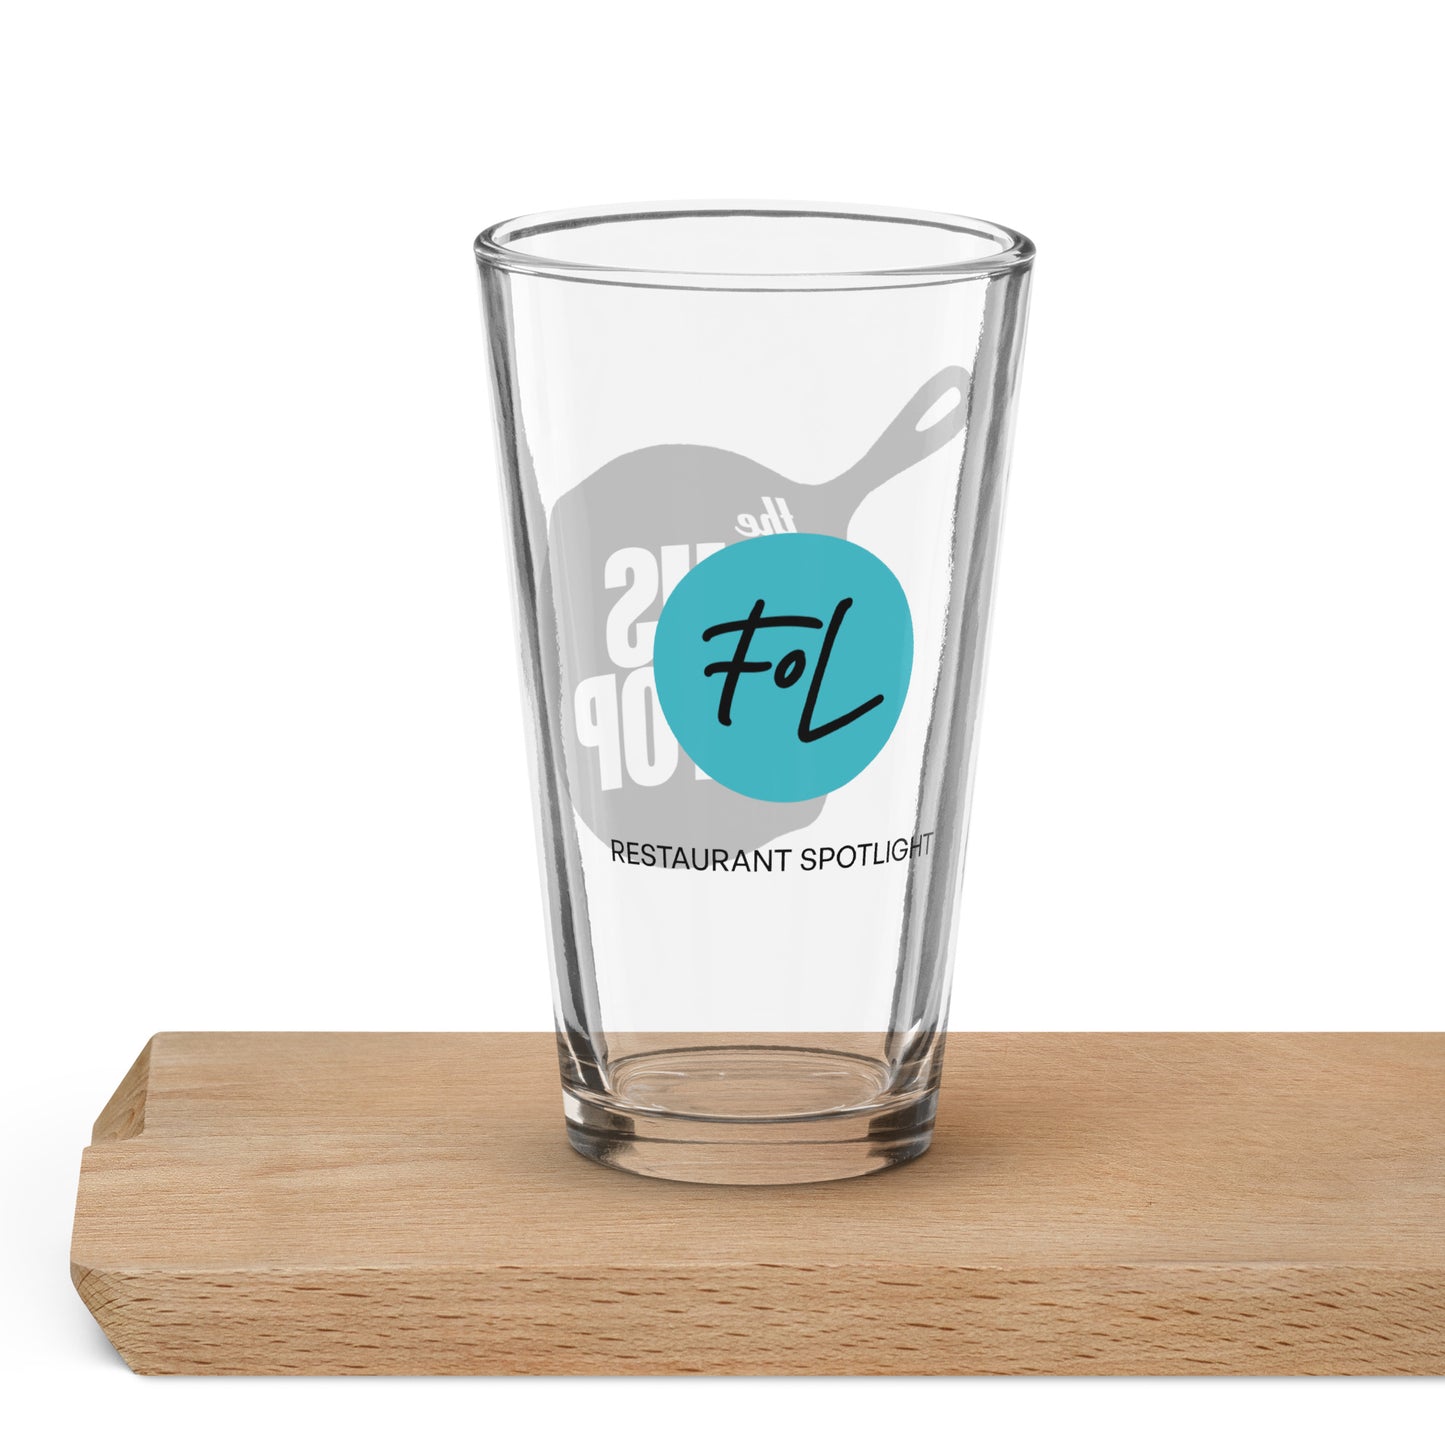 The Bus Stop Bistro Shaker pint glass